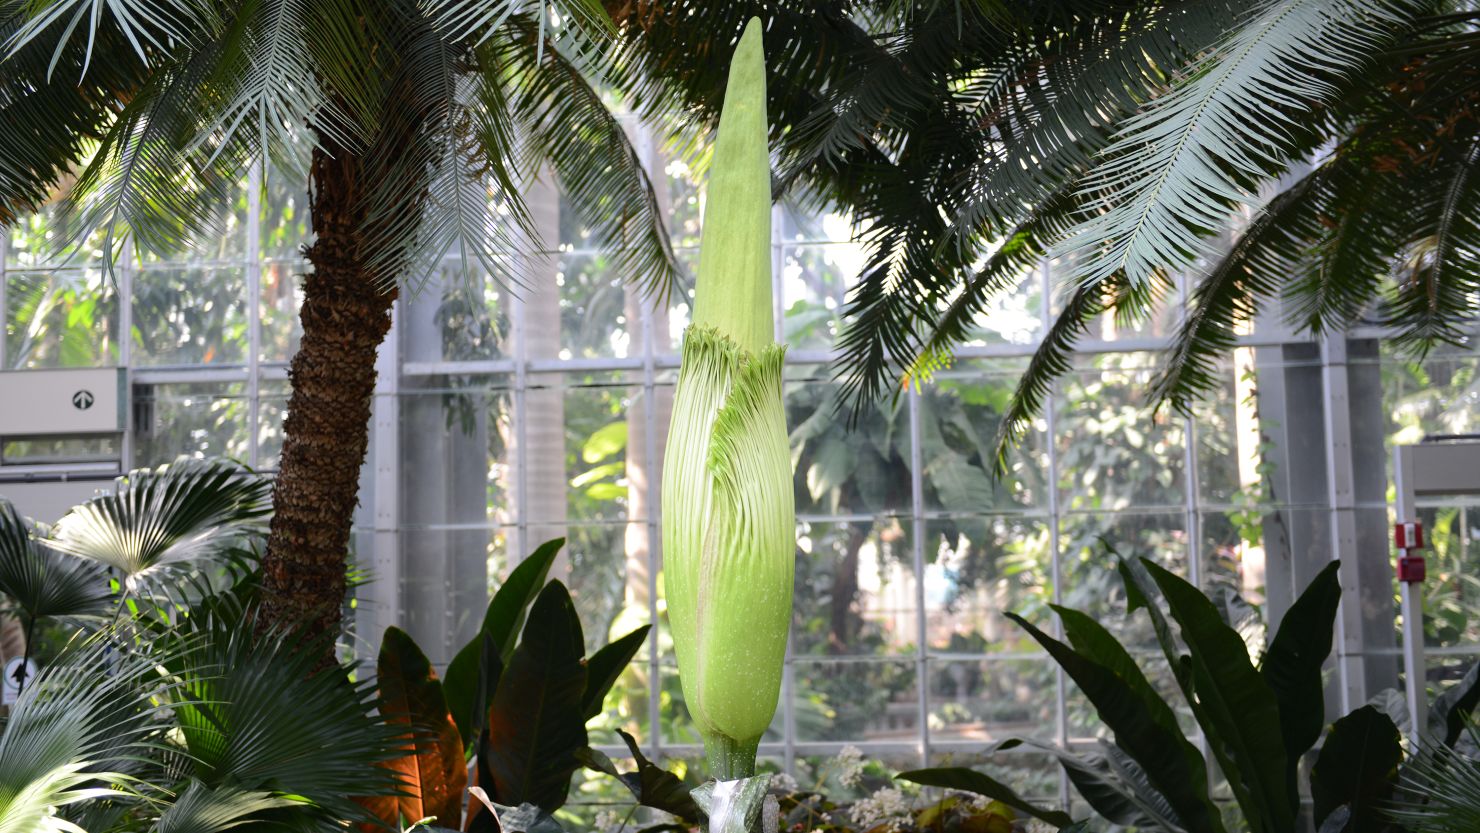 The U.S. Botanic Garden's corpse flower (titan arum) looks better than it smells. The plant is expected to bloom this week.